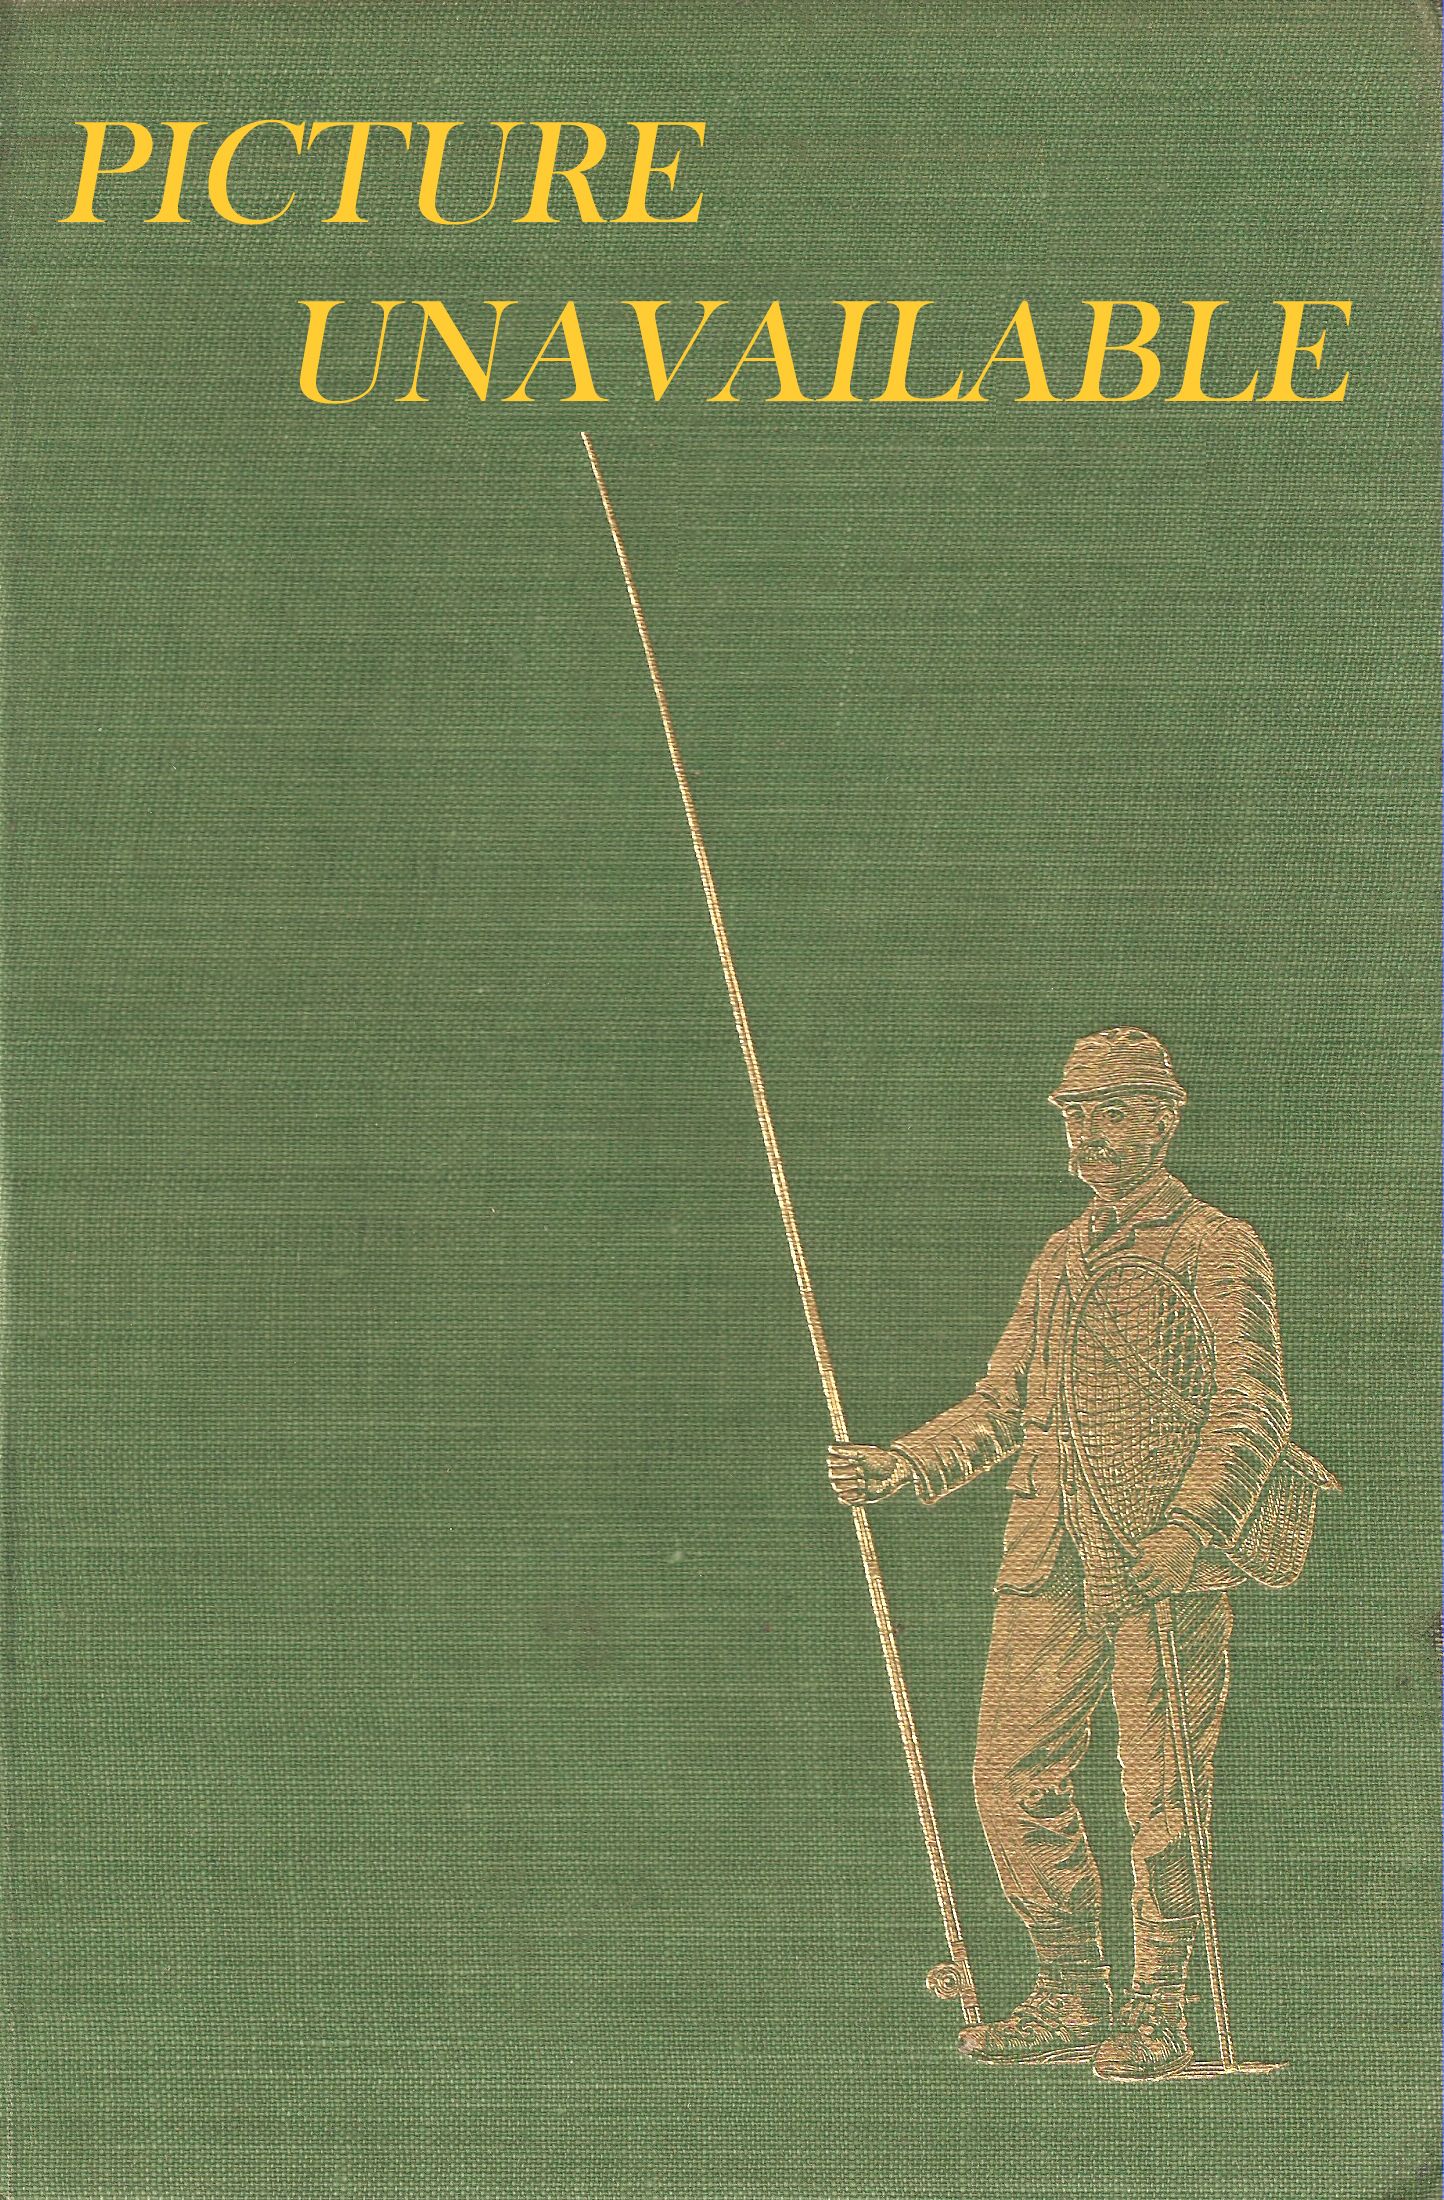 THE COMPLETE ANGLER: OR THE CONTEMPLATIVE MAN'S RECREATION OF IZAAK WALTON  AND CHARLES COTTON. Edited by John Major. The First Navarre Edition.